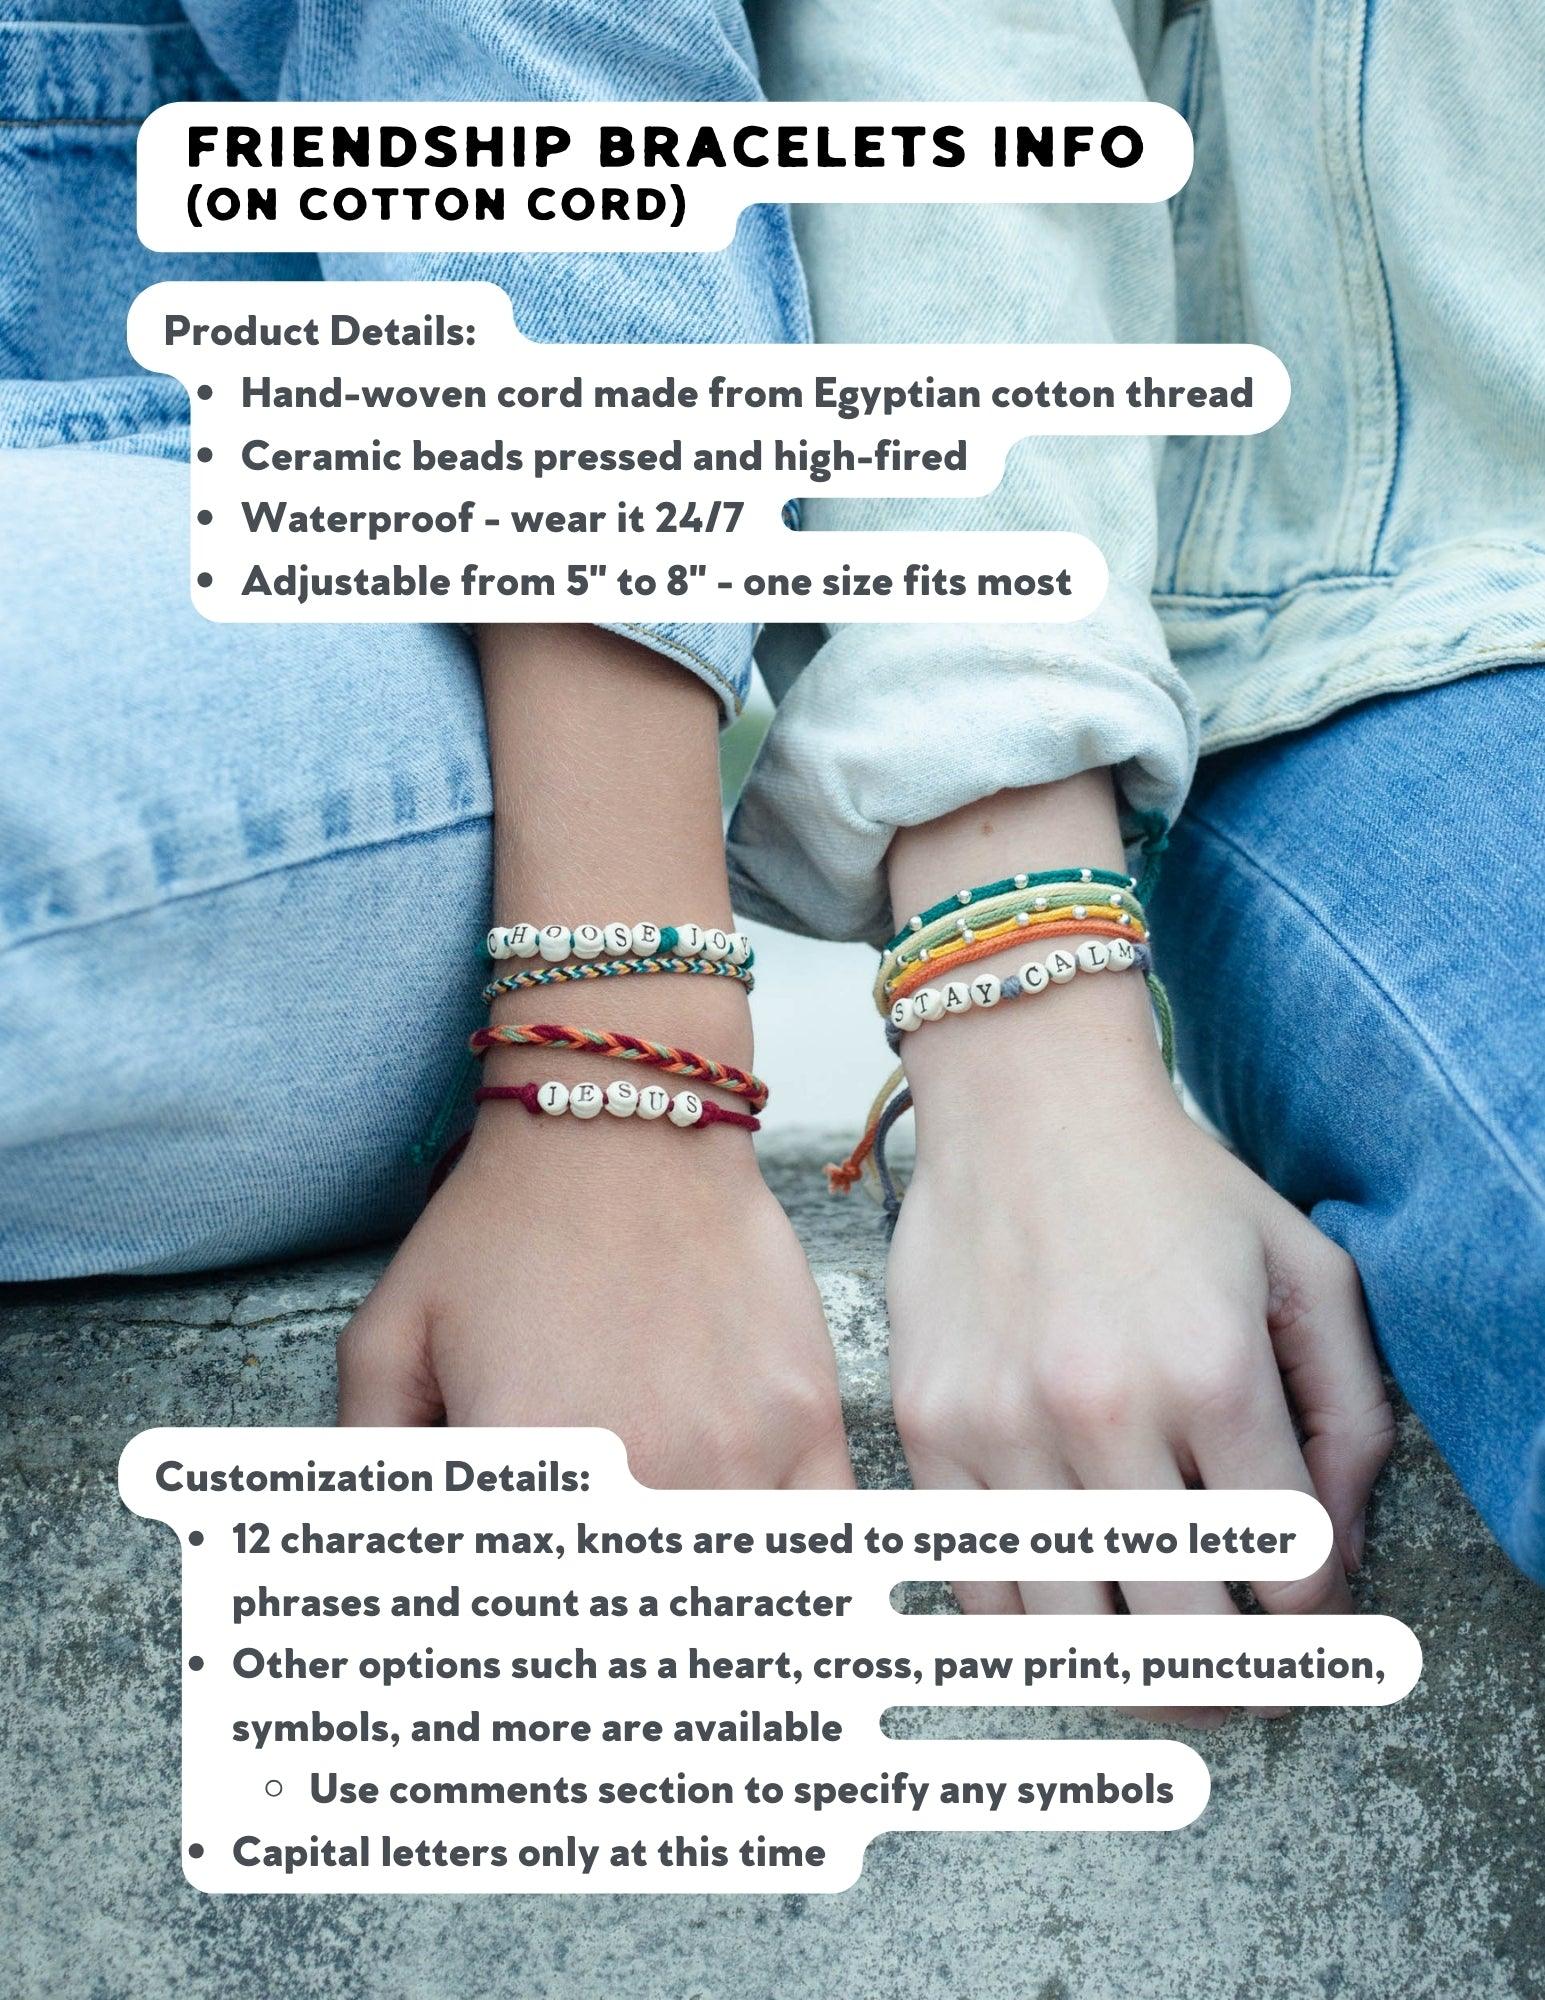 Why Friendship Bracelets Are Making A Comeback